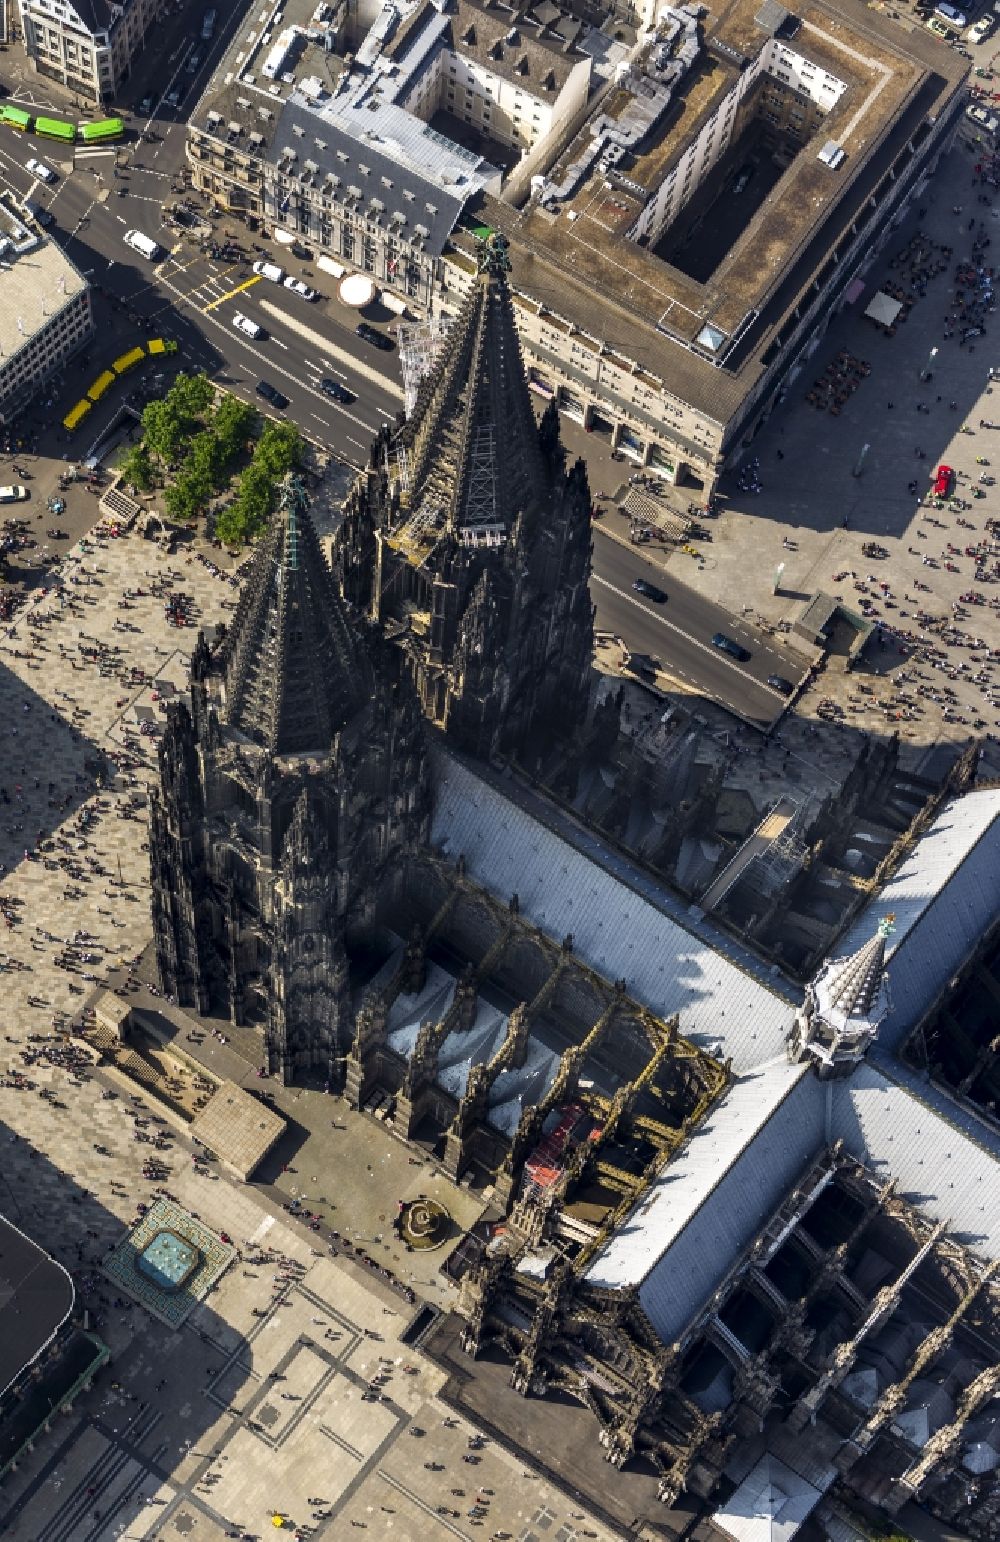 Aerial photograph Köln - View of the Cologne Cathedral in the center of Cologne, near central station. The Cologne Cathedral is a Roman Catholic church in the Gothic style in Cologne and the Cathedral of the Archdiocese of Cologne. It is the second highest church building in Europe and the third highest in the world